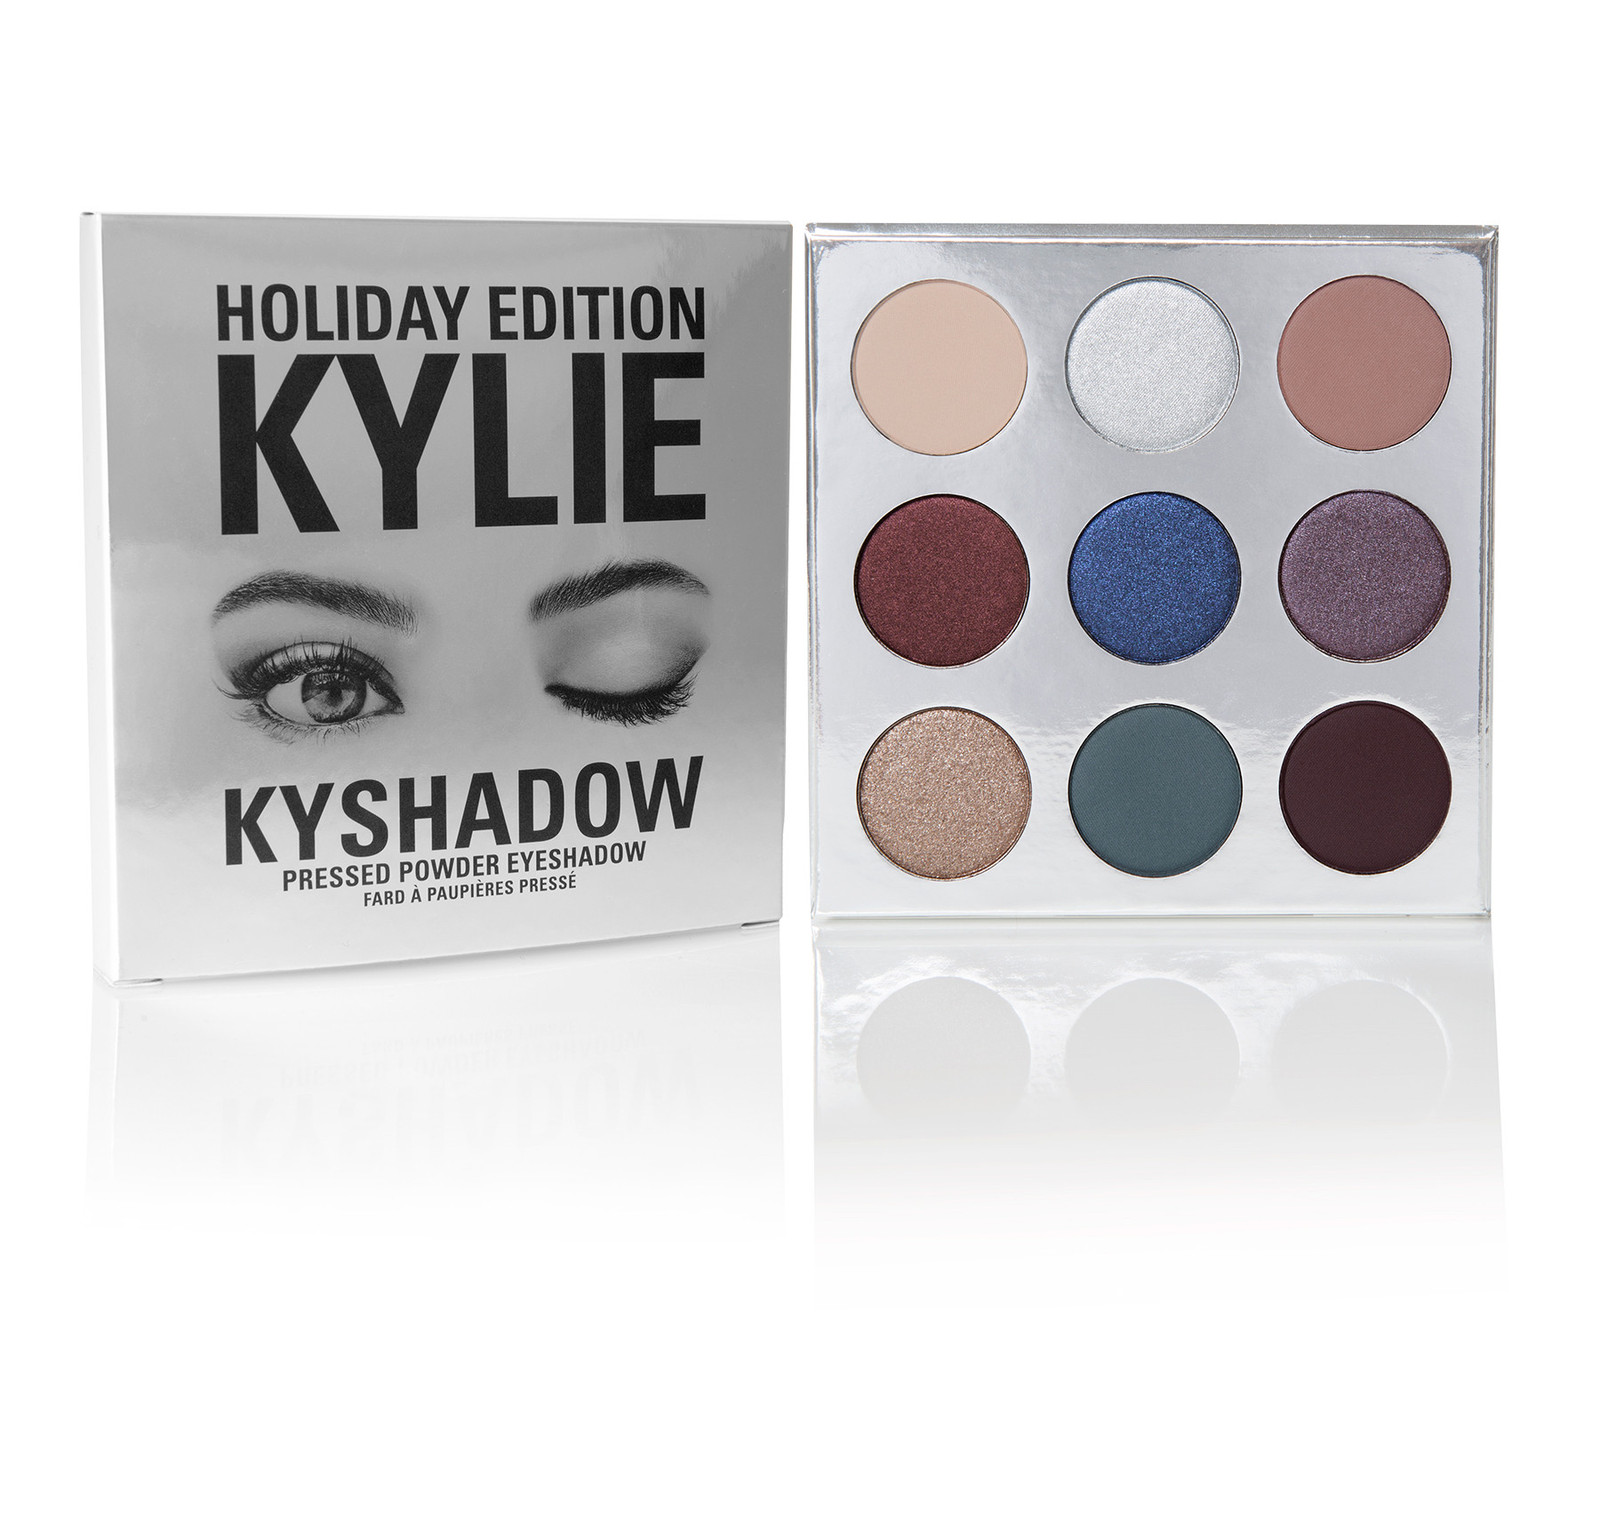 Kylie Cosmetics, Limited Edition Kyshadow Holiday Palette - $62.90